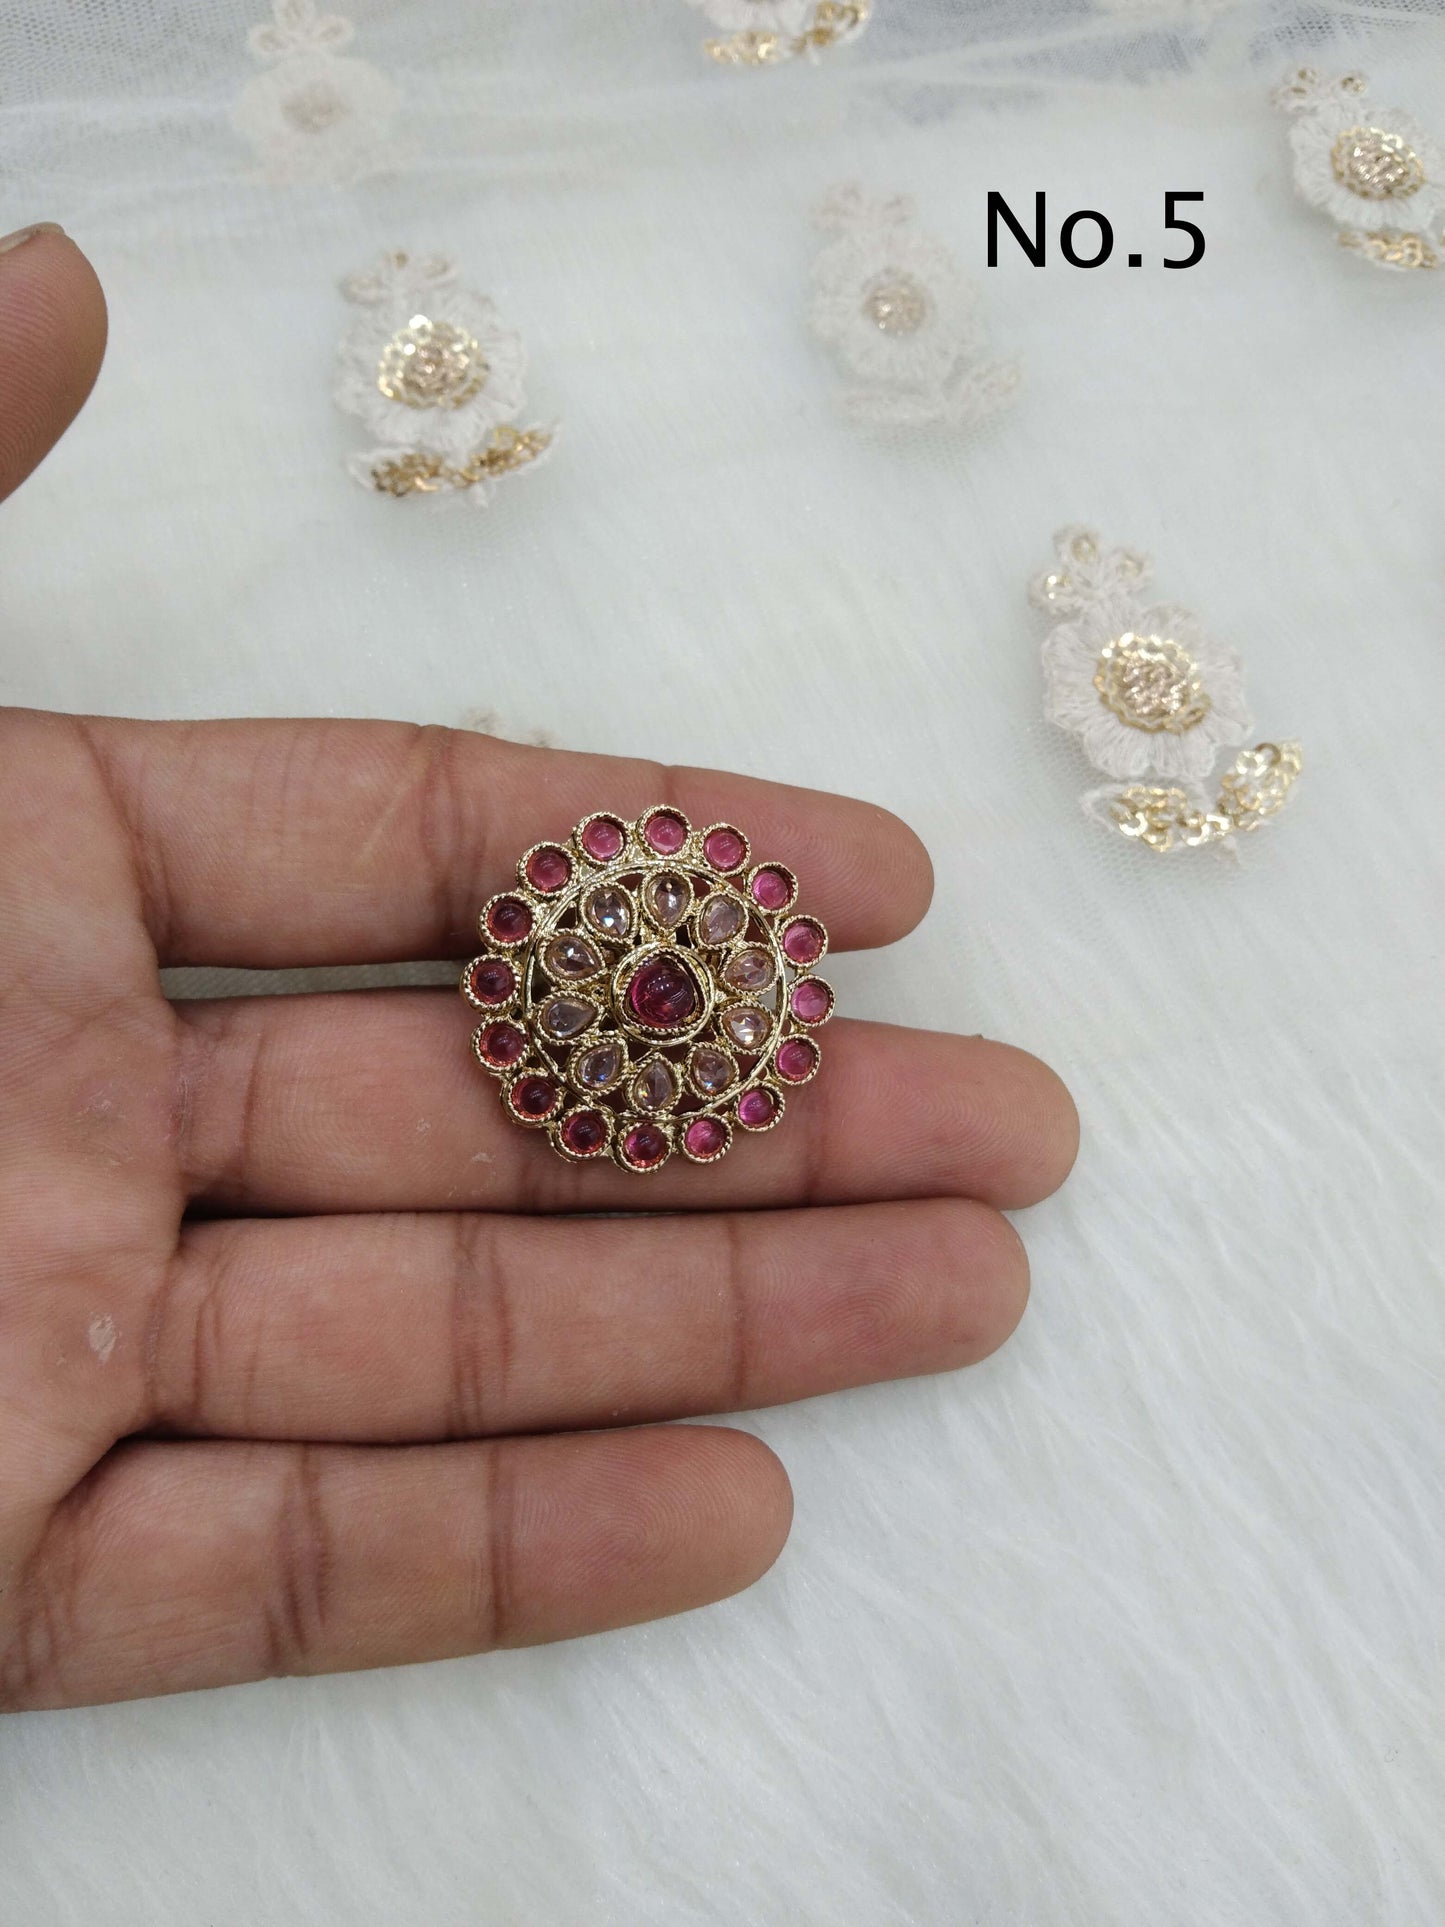 Indian Ring /Antique gold Finger rings round bridal ring hand accessory/saini